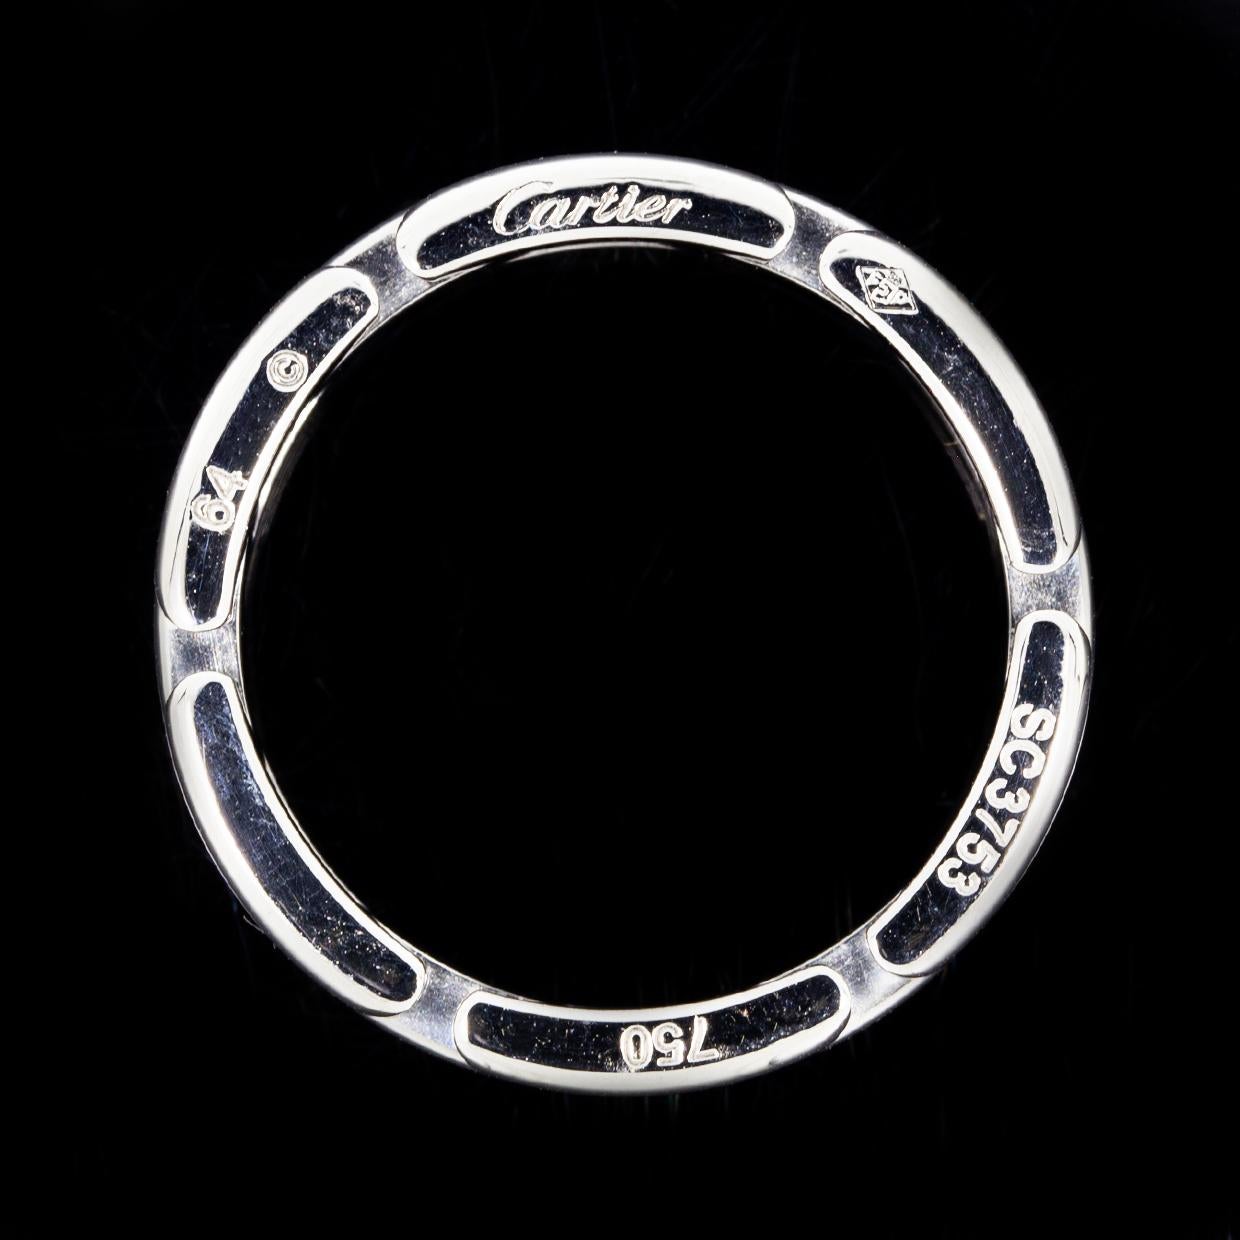 Item Details
Estimated Retail $2,250.00
Brand Cartier
Collection Maillon Panthere
Metal White Gold
Ring Size 10.75
Sizable No
Width 7.5 mm
Metal Purity 18k
Finish Polished

Founded in 1847 by Louis-Francois Cartier, a French jeweler, Cartier quickly